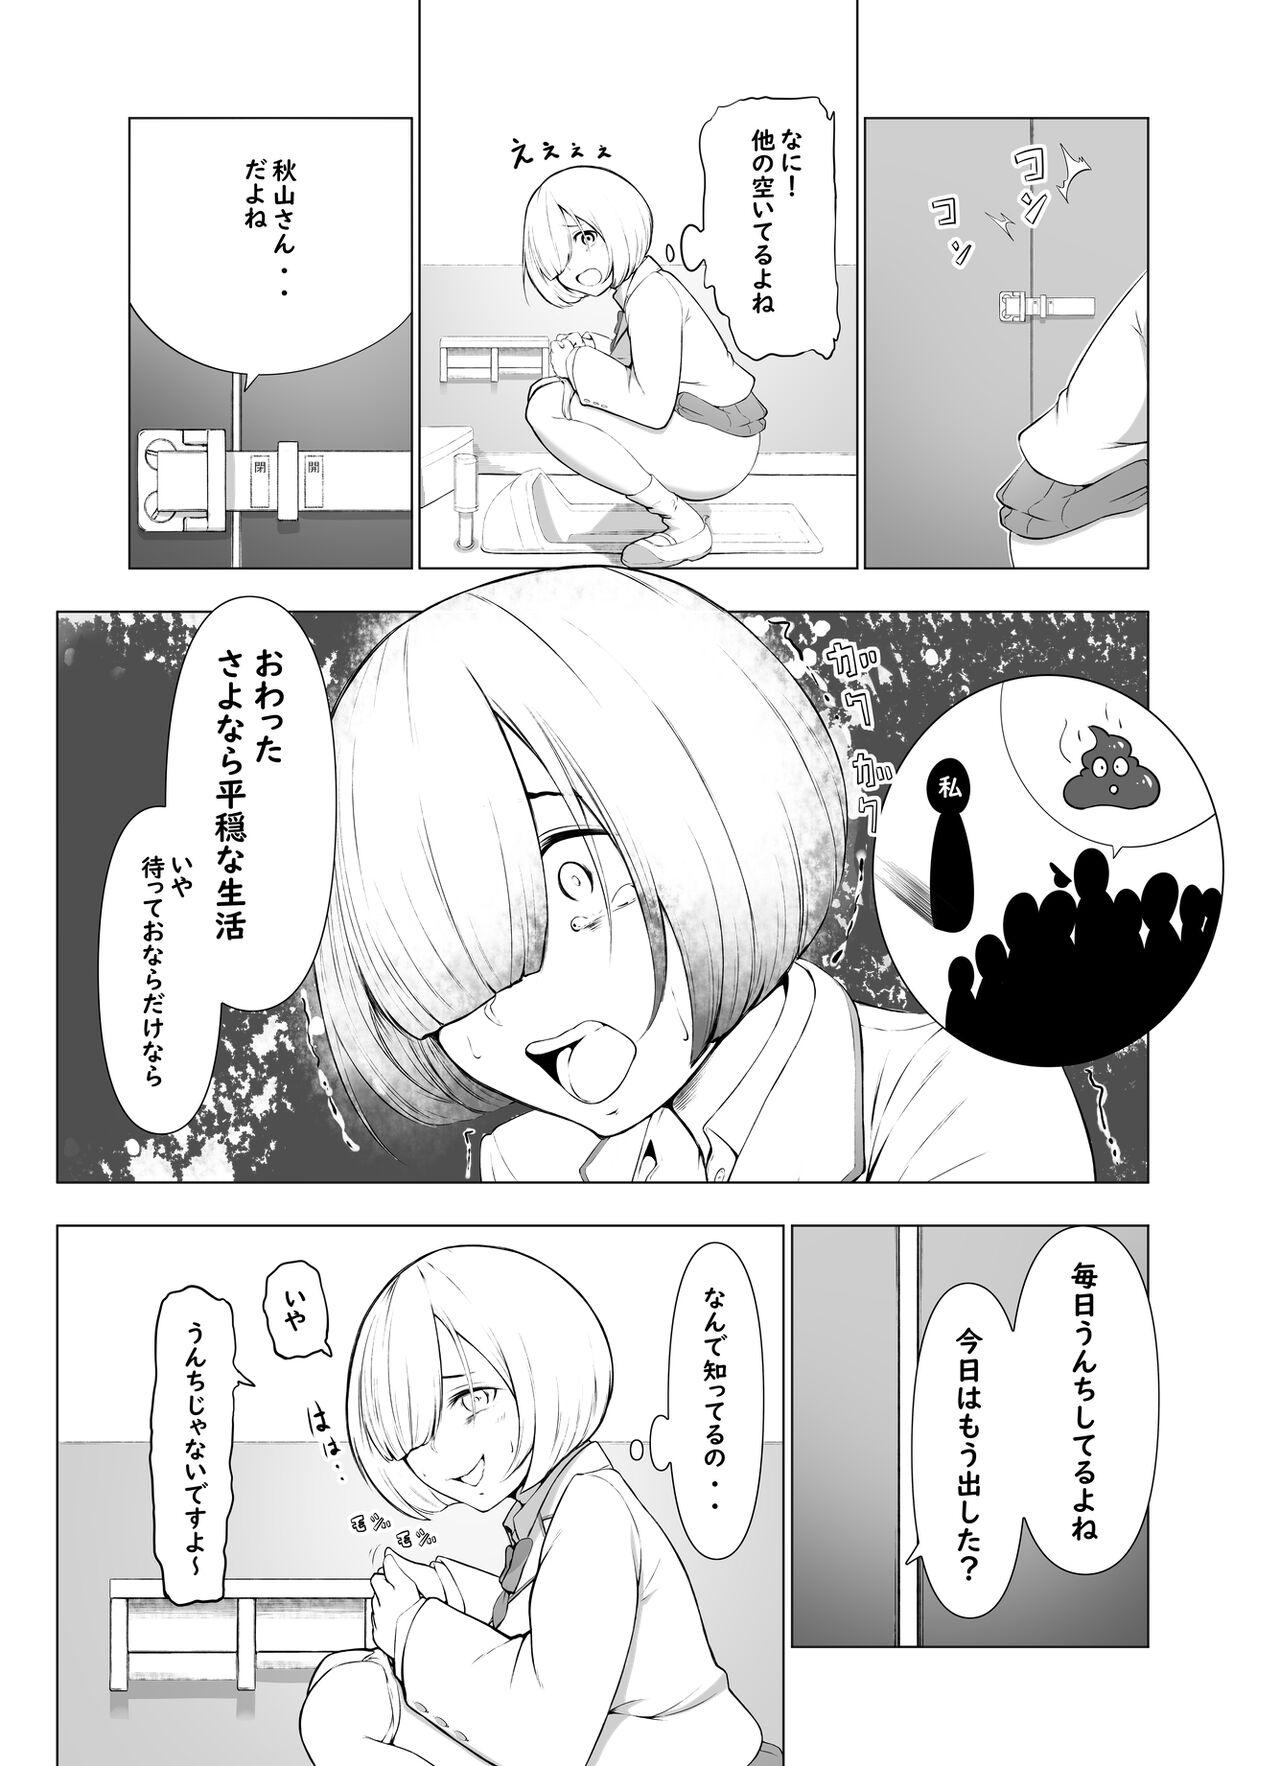 Real Orgasm 【脱糞漫画】トイレの音【８P】 Fuck - Page 4